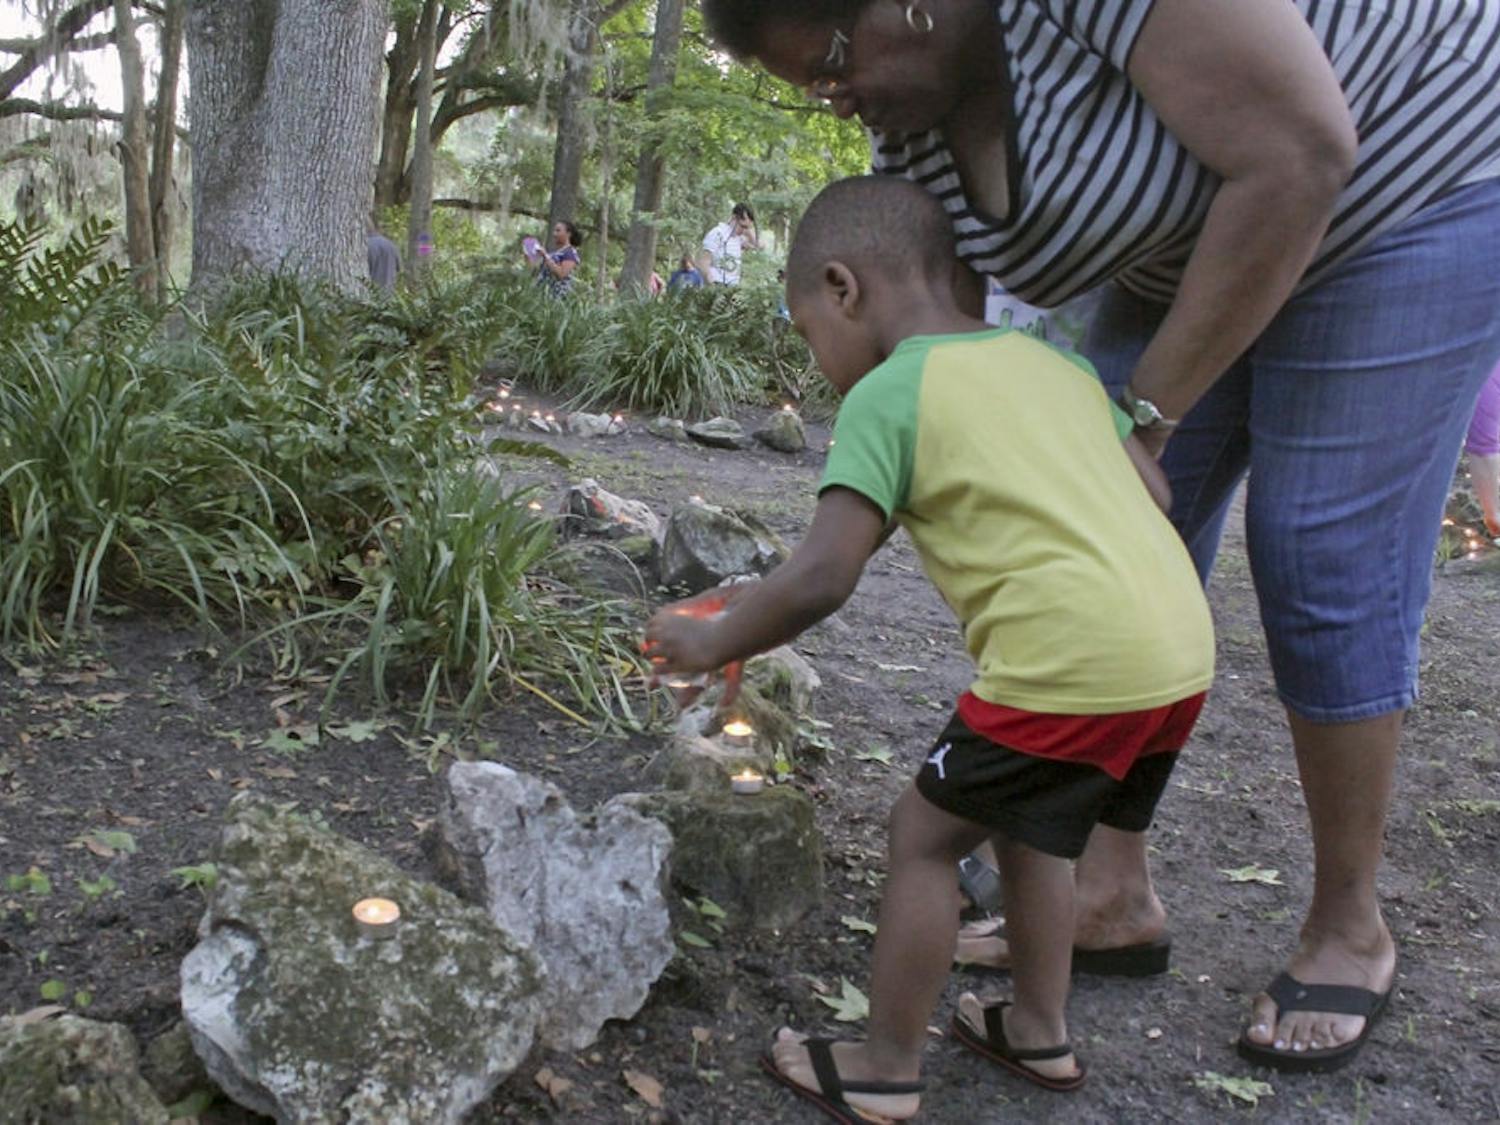 Mykeal Duggan, 3, and grandmother Alice Foreman, 61, place candles at the Victims' Memorial Park in Squirrel Ridge Park on Tuesday. This was the 25th candlelight vigil at the Victims' Memorial Park